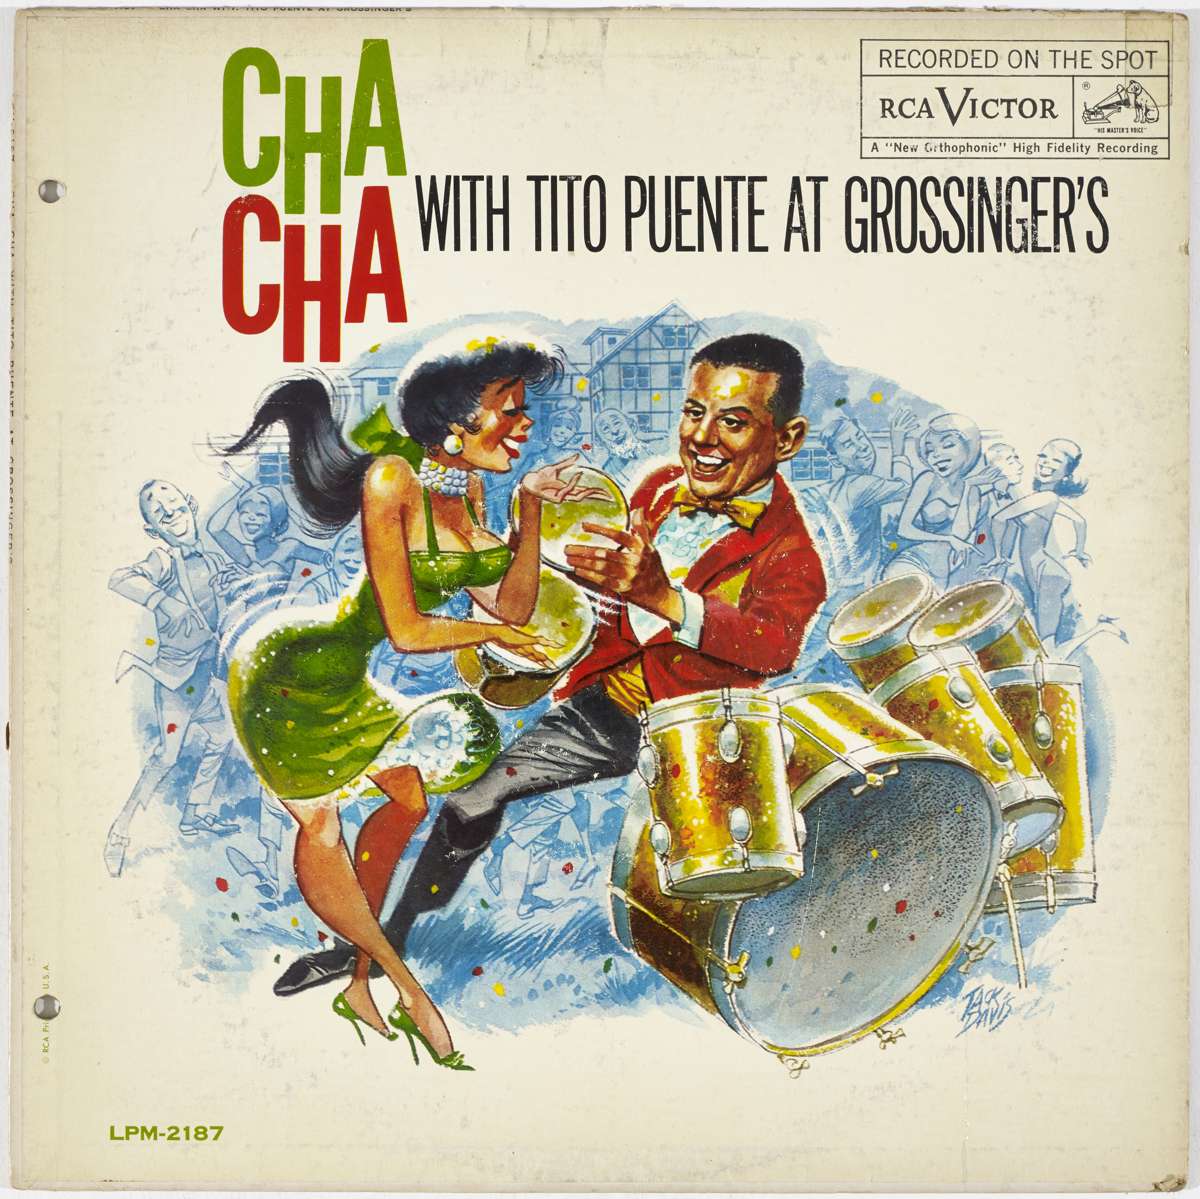 Photo courtesy of The Wolfsonian, a museum administered by Florida International University (FIU), showing the album cover "cha cha" with Tito Puente in Grossinger's (1960), which is part of the exhibition "Turn the Beat Around"which shows how Afro-Cuban rhythms "forever changed the musical landscape" of the USA. Photo: The Wolfsonian-FIU / EFE.